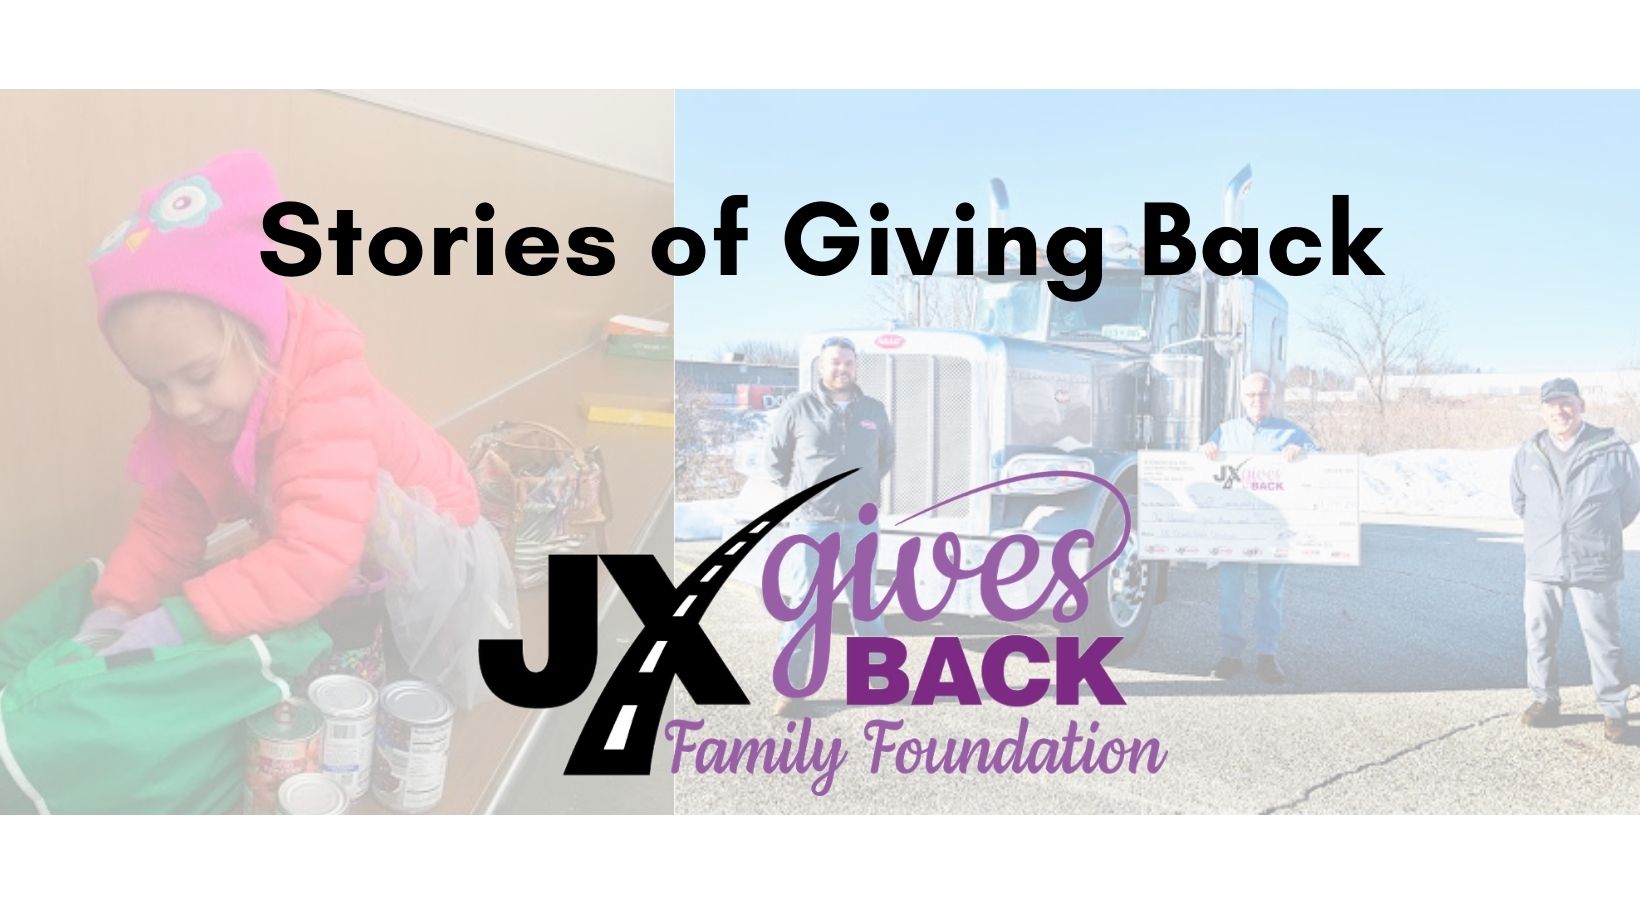 Stories of Giving Back